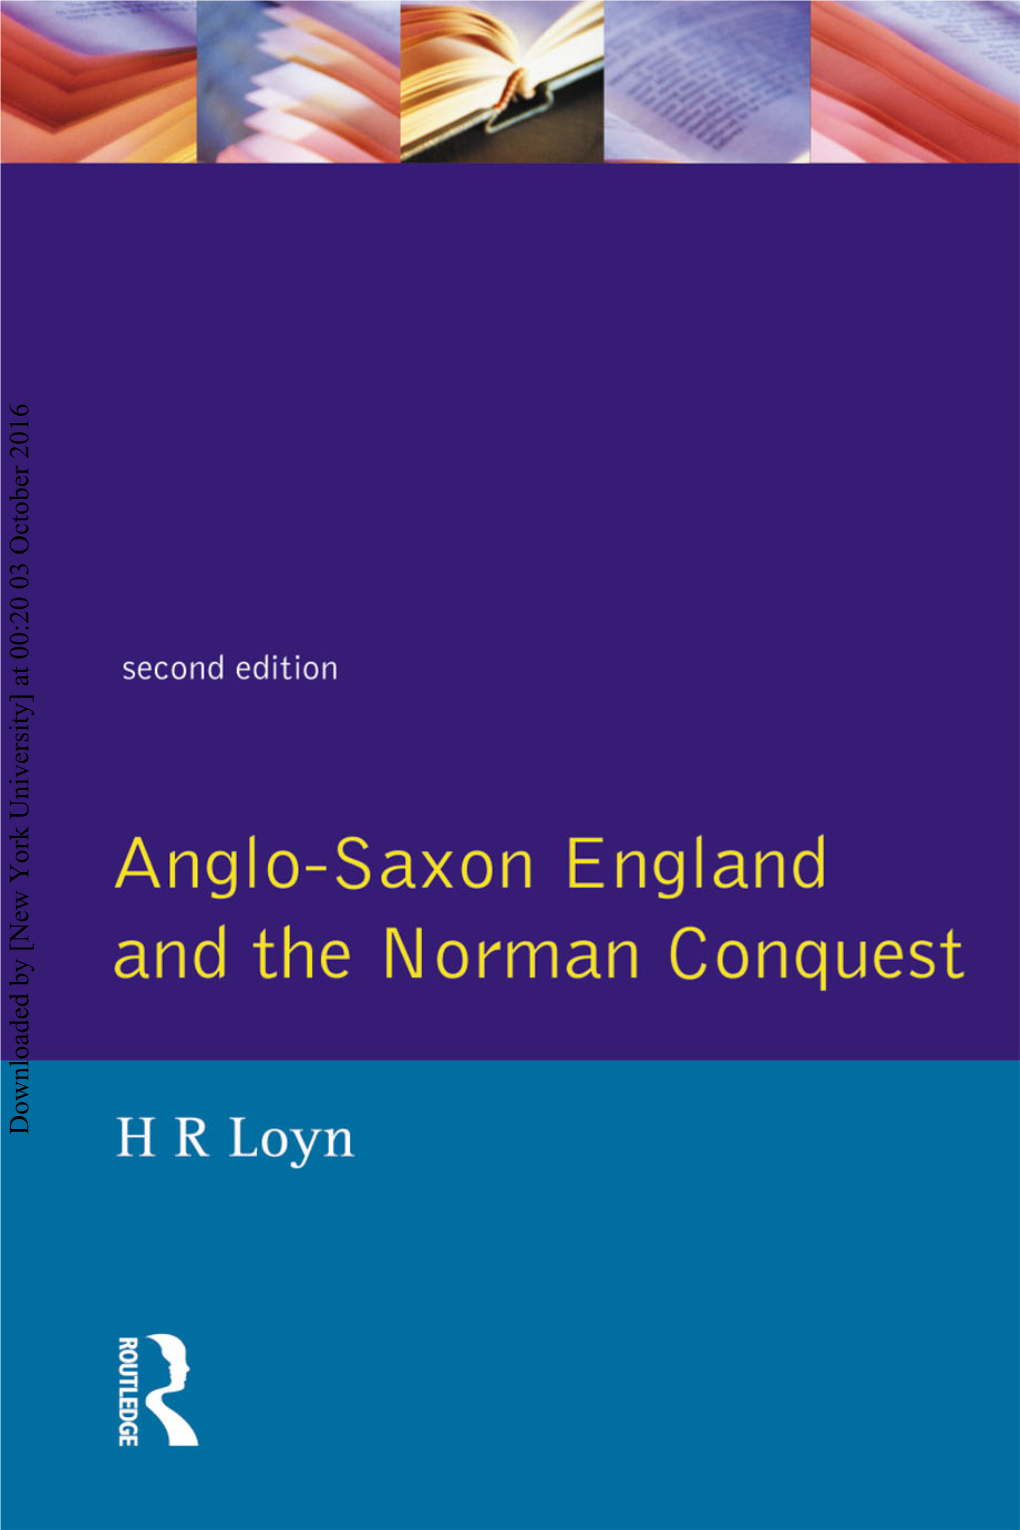 Anglo-Saxon England and the Norman Conquest